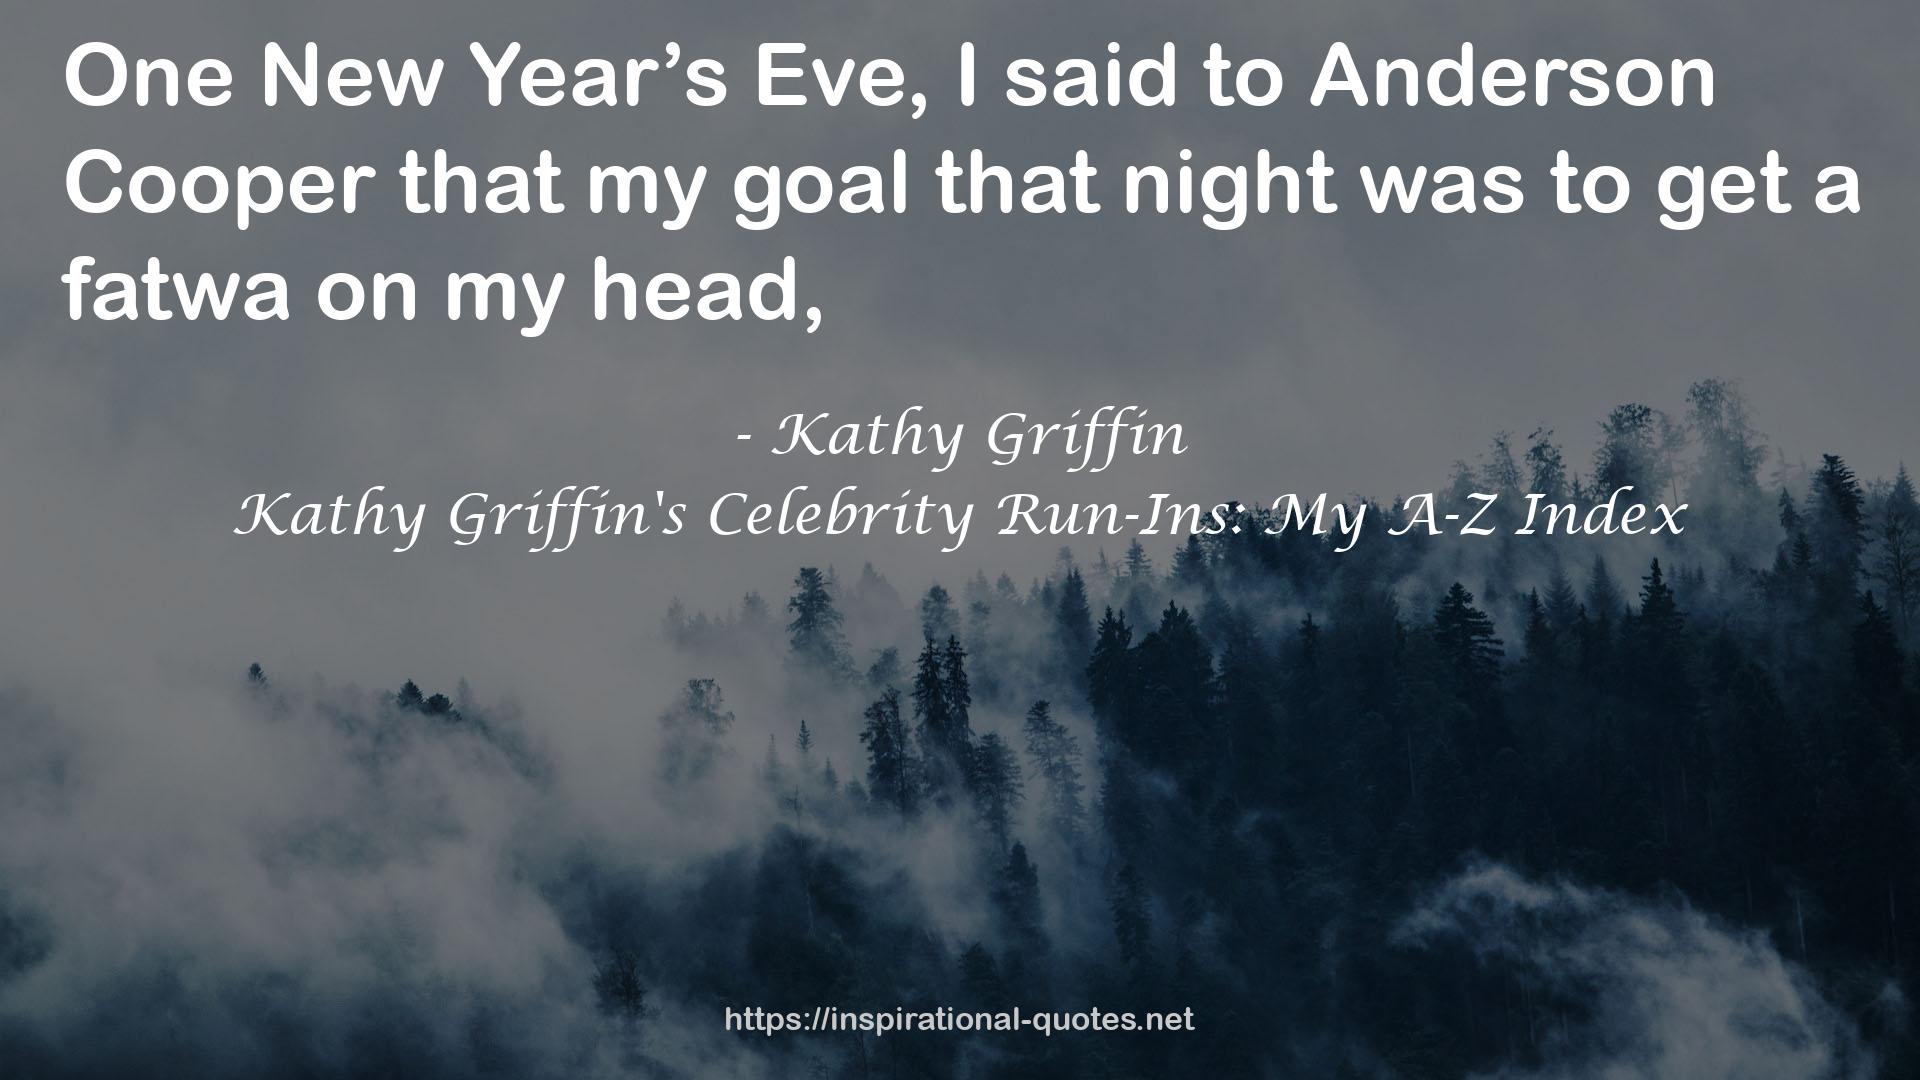 Kathy Griffin's Celebrity Run-Ins: My A-Z Index QUOTES